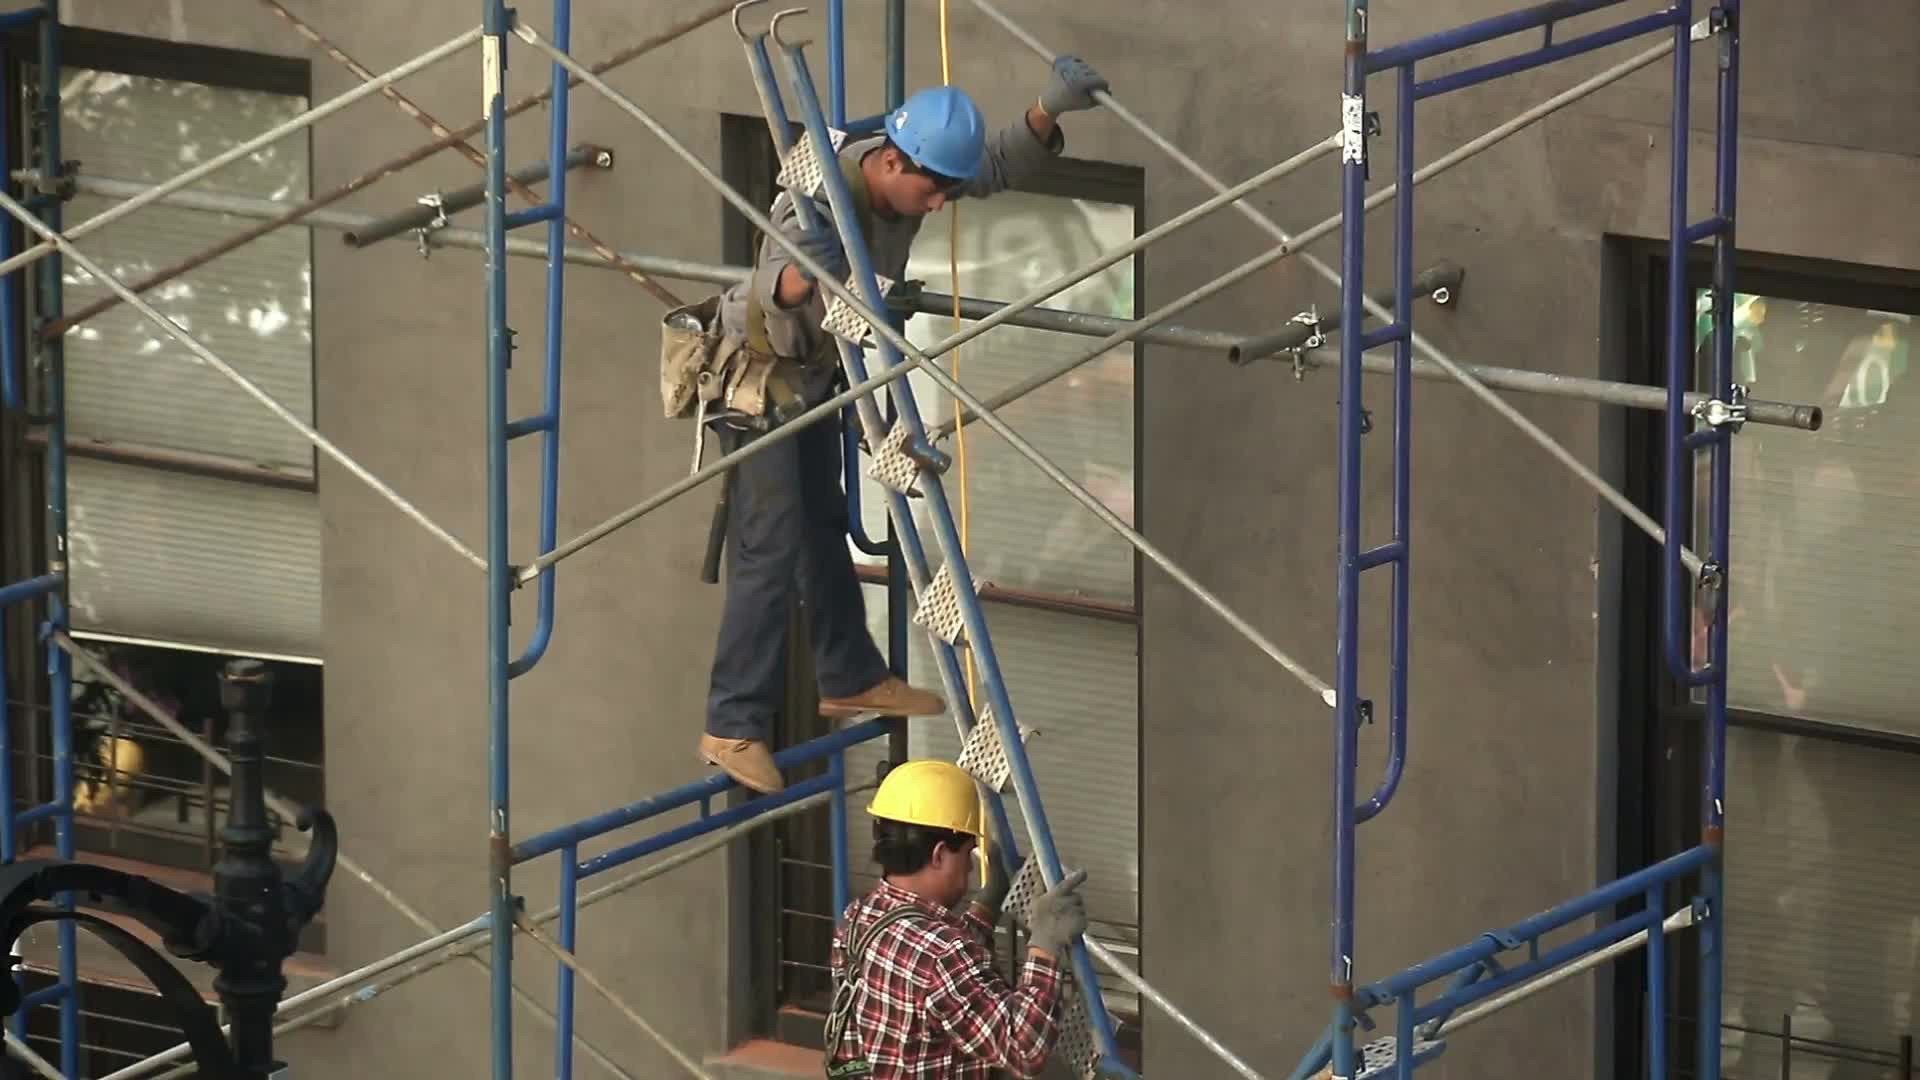 construction workers in hard hats carrying ladder climbing scaffolding on building